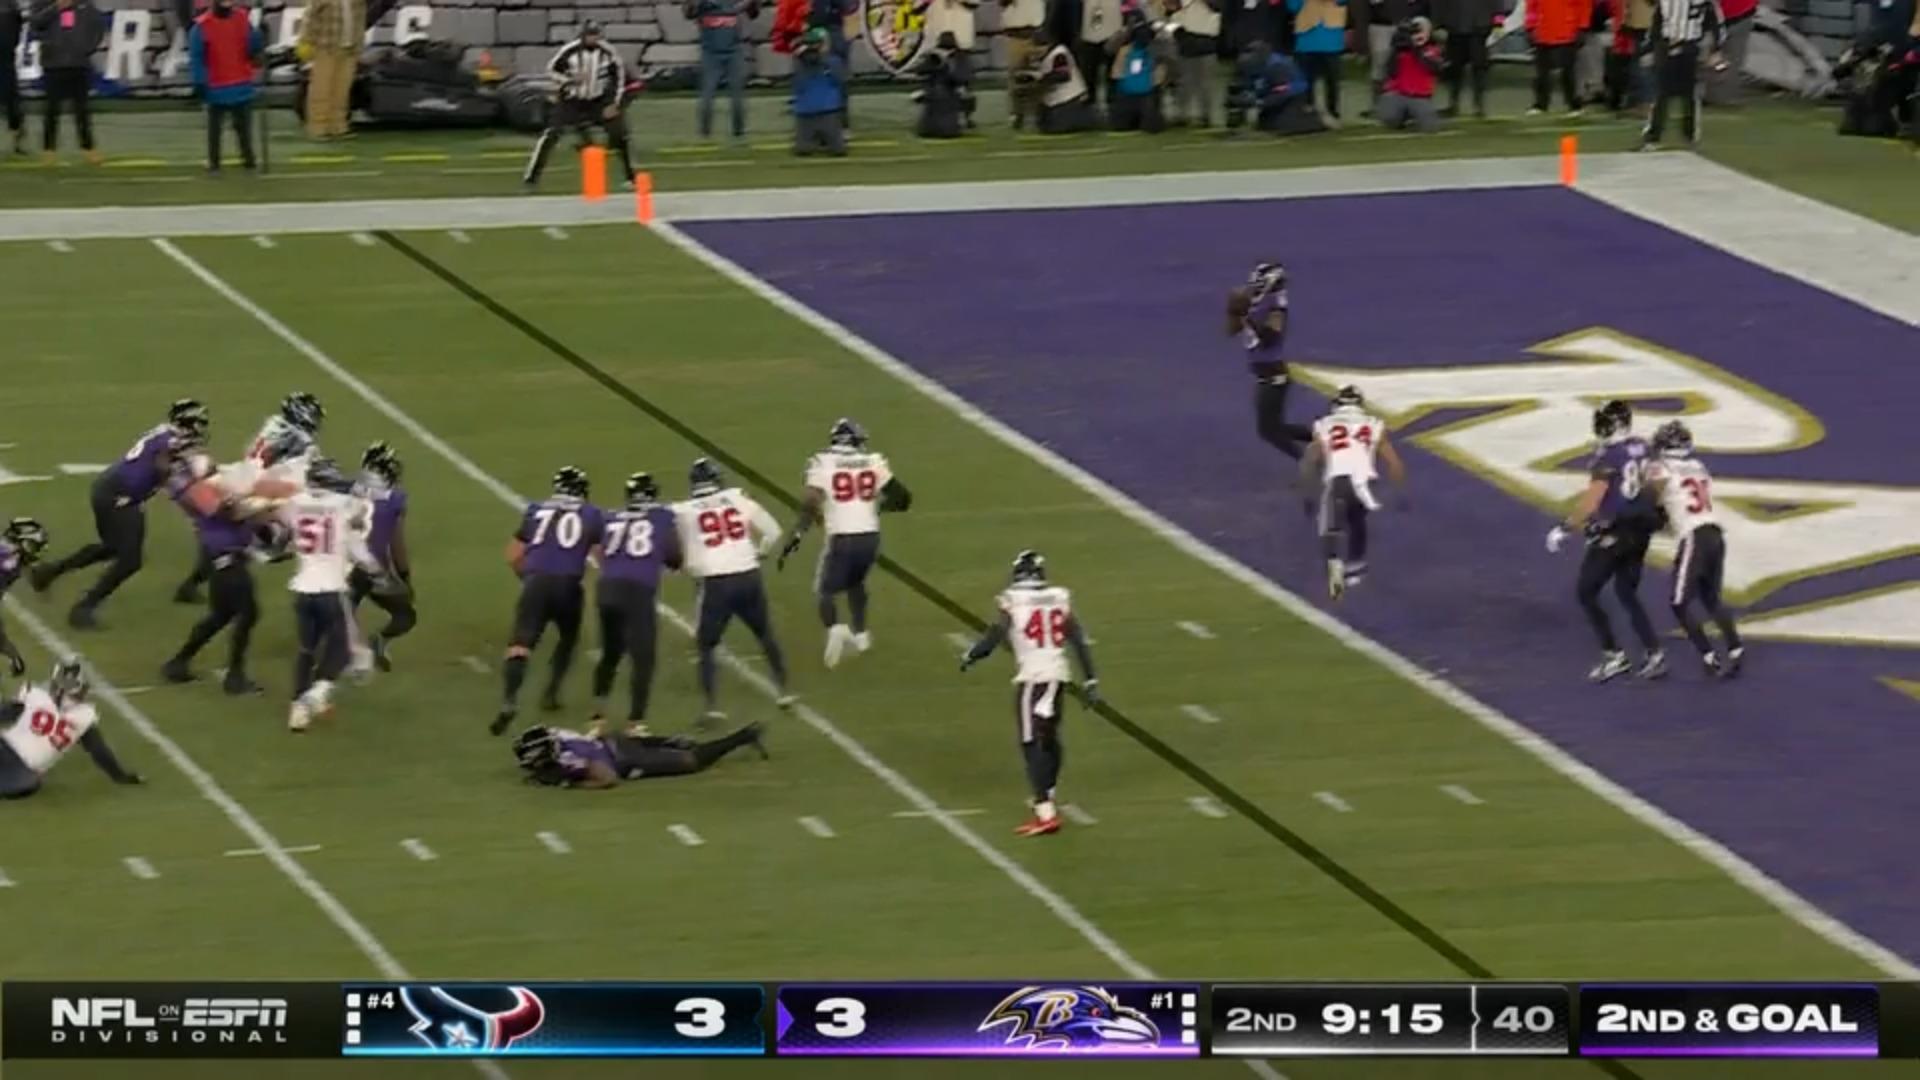 Short pass play into the Ravens end zone with the touchdown